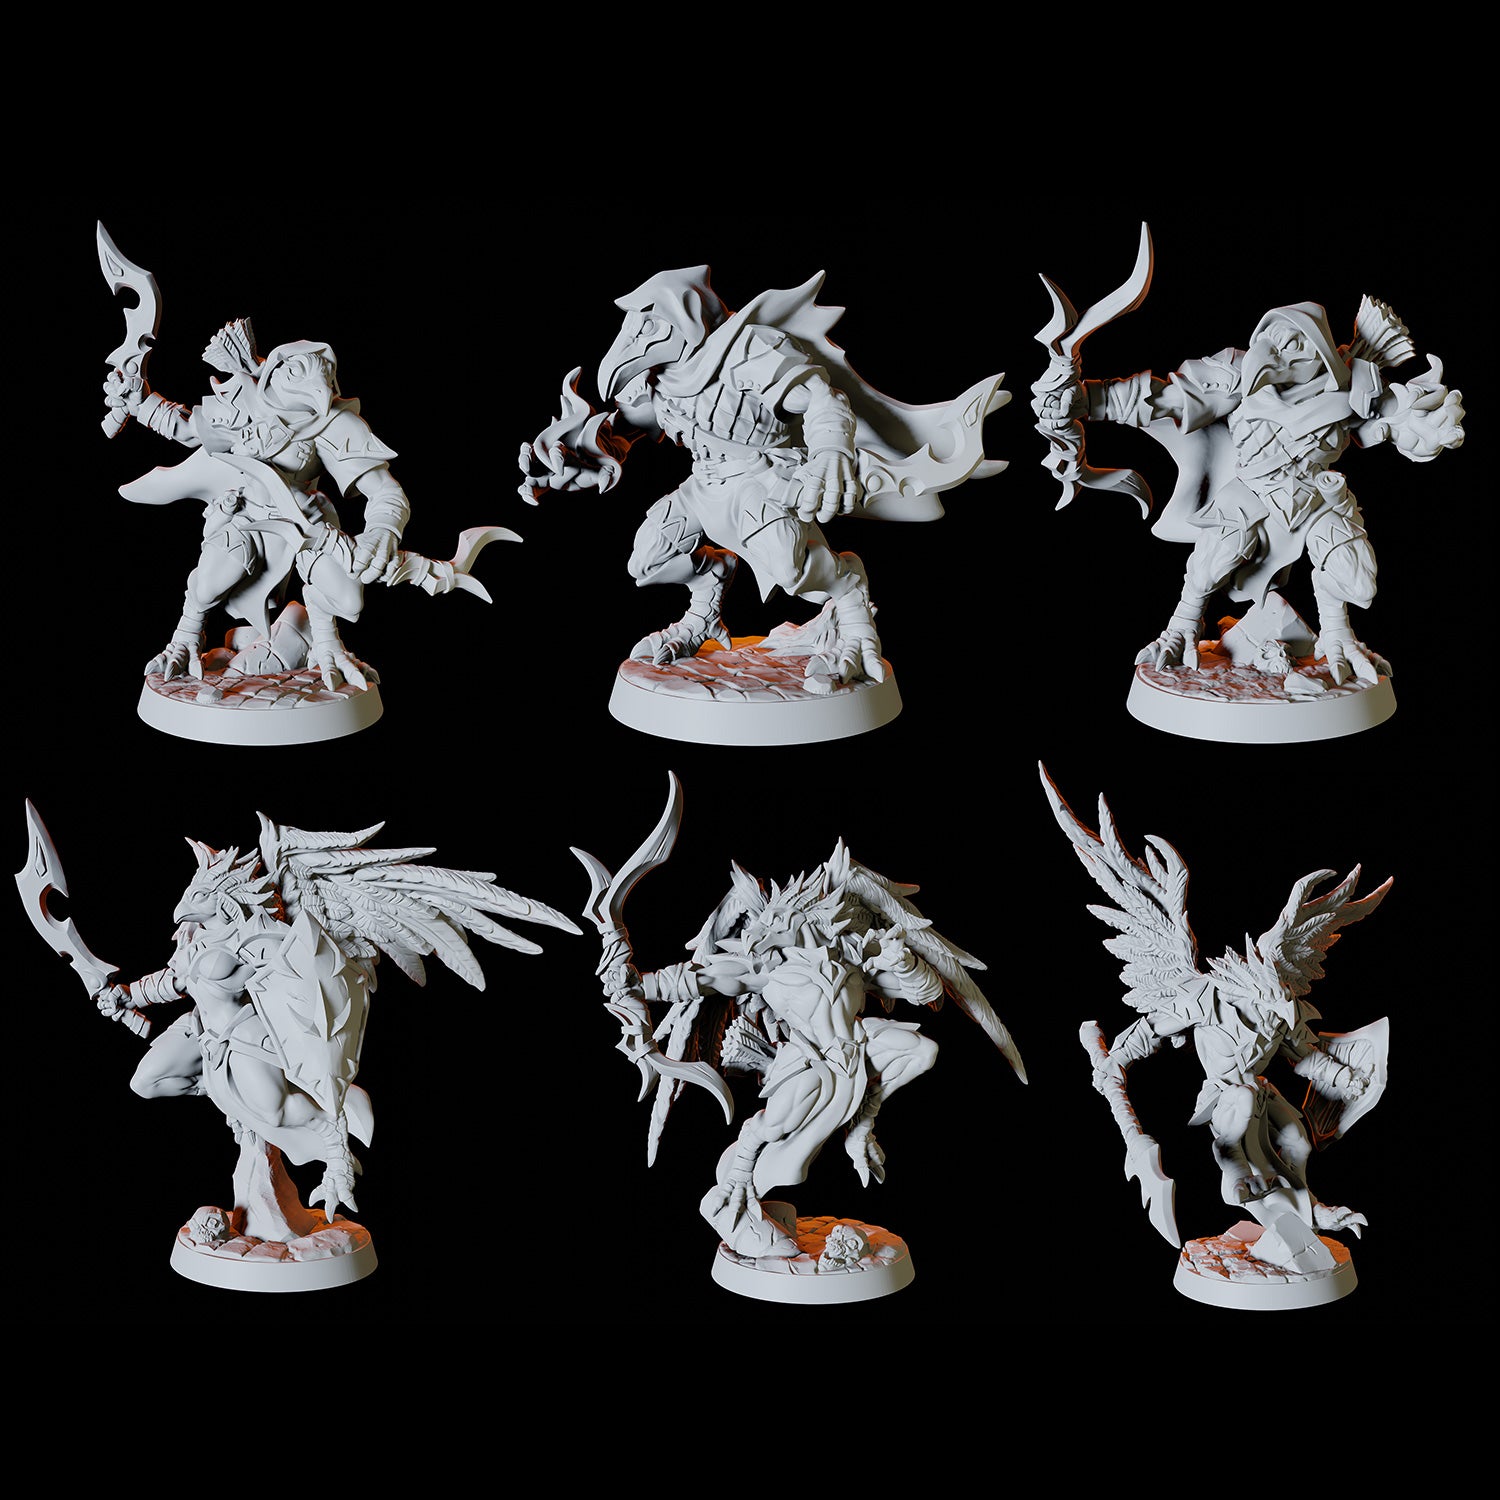 Aarakocra Miniatures for Dungeons and Dragons - Six Soldiers